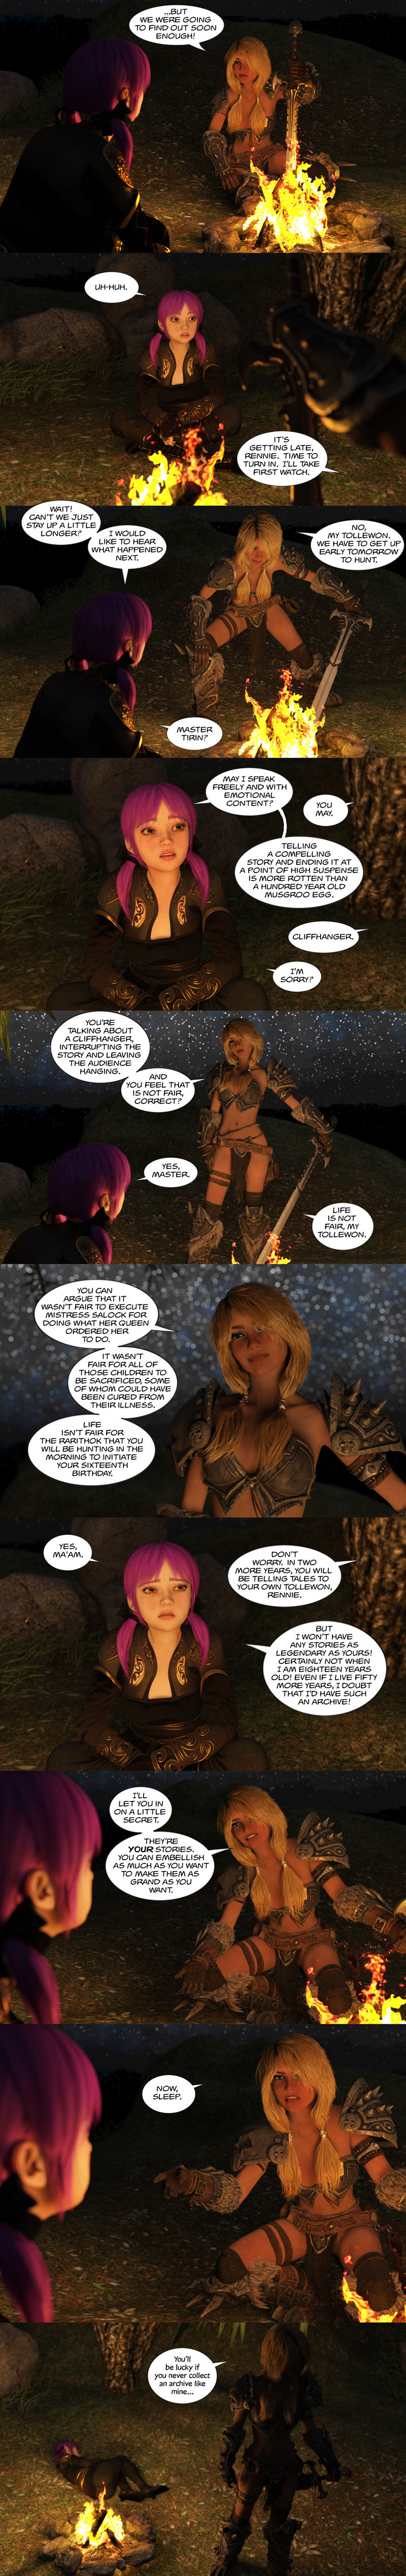 Chapter 16, page 39 – Story time is over for now, Rennie